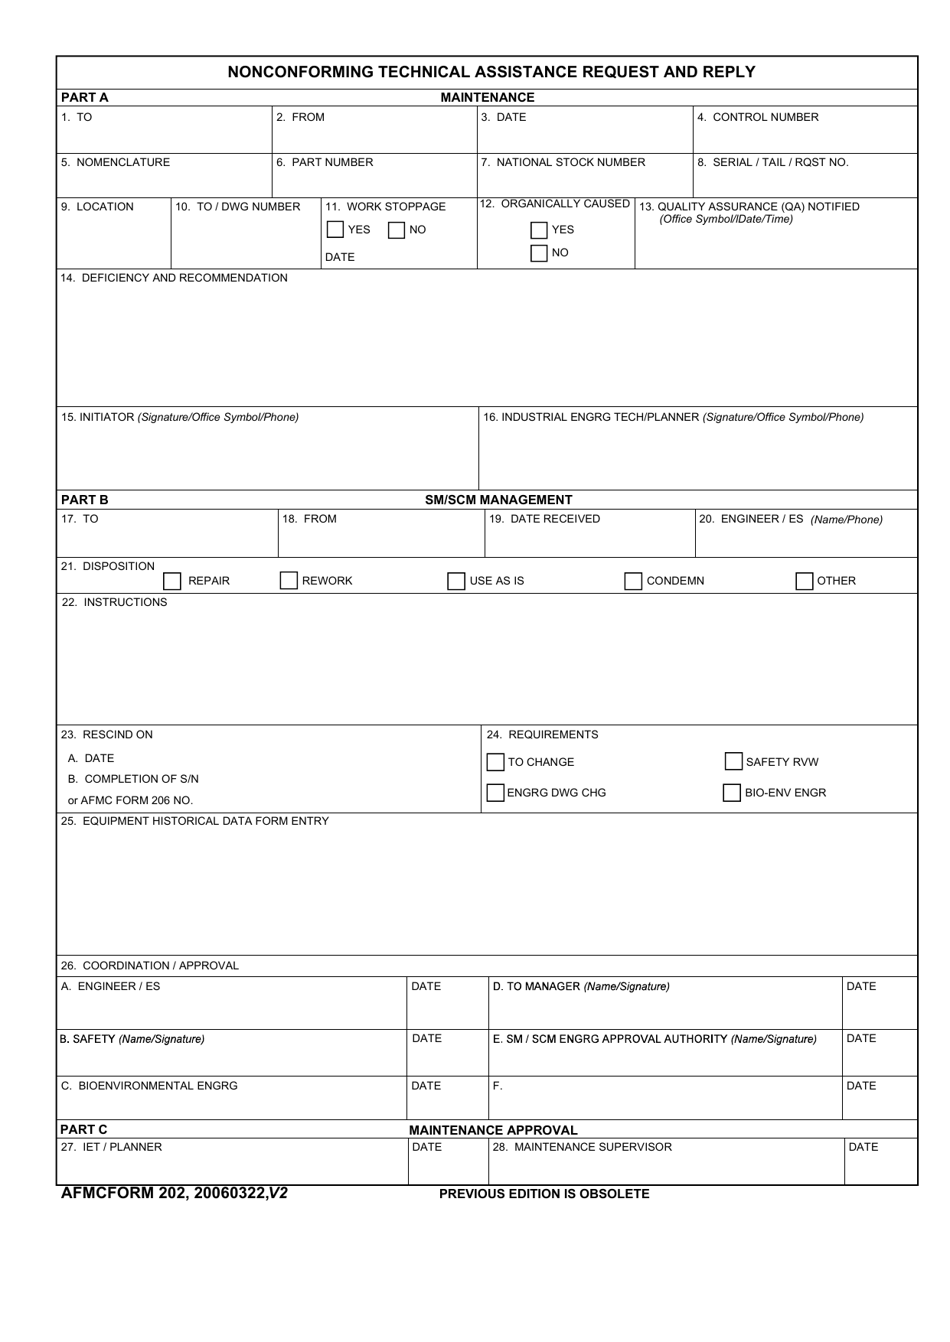 AFMC Form 202 Nonconforming Technical Assistance Request and Reply, Page 1